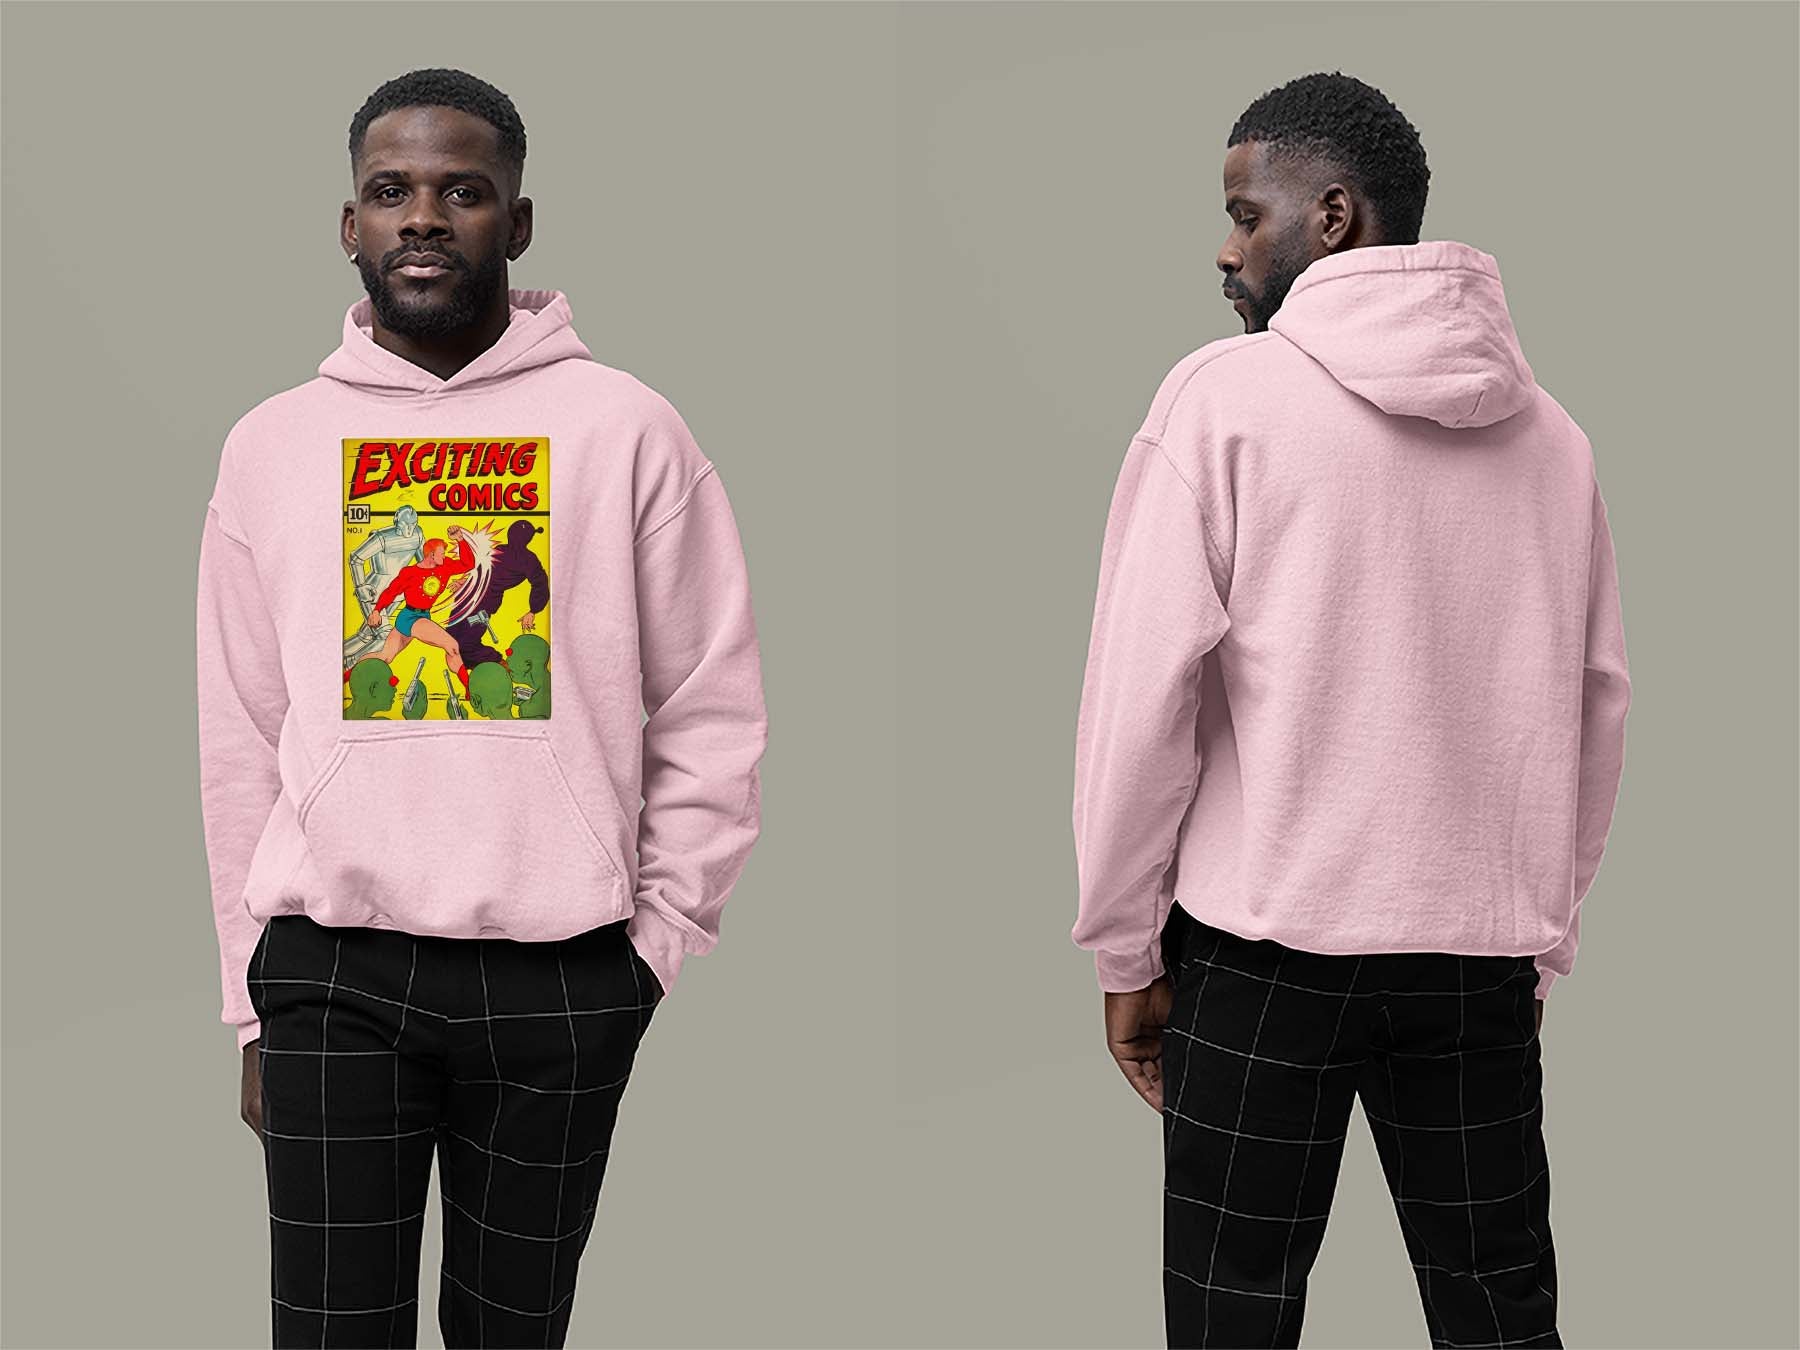 Exciting Comics No.1 Hoodie Small Light Pink